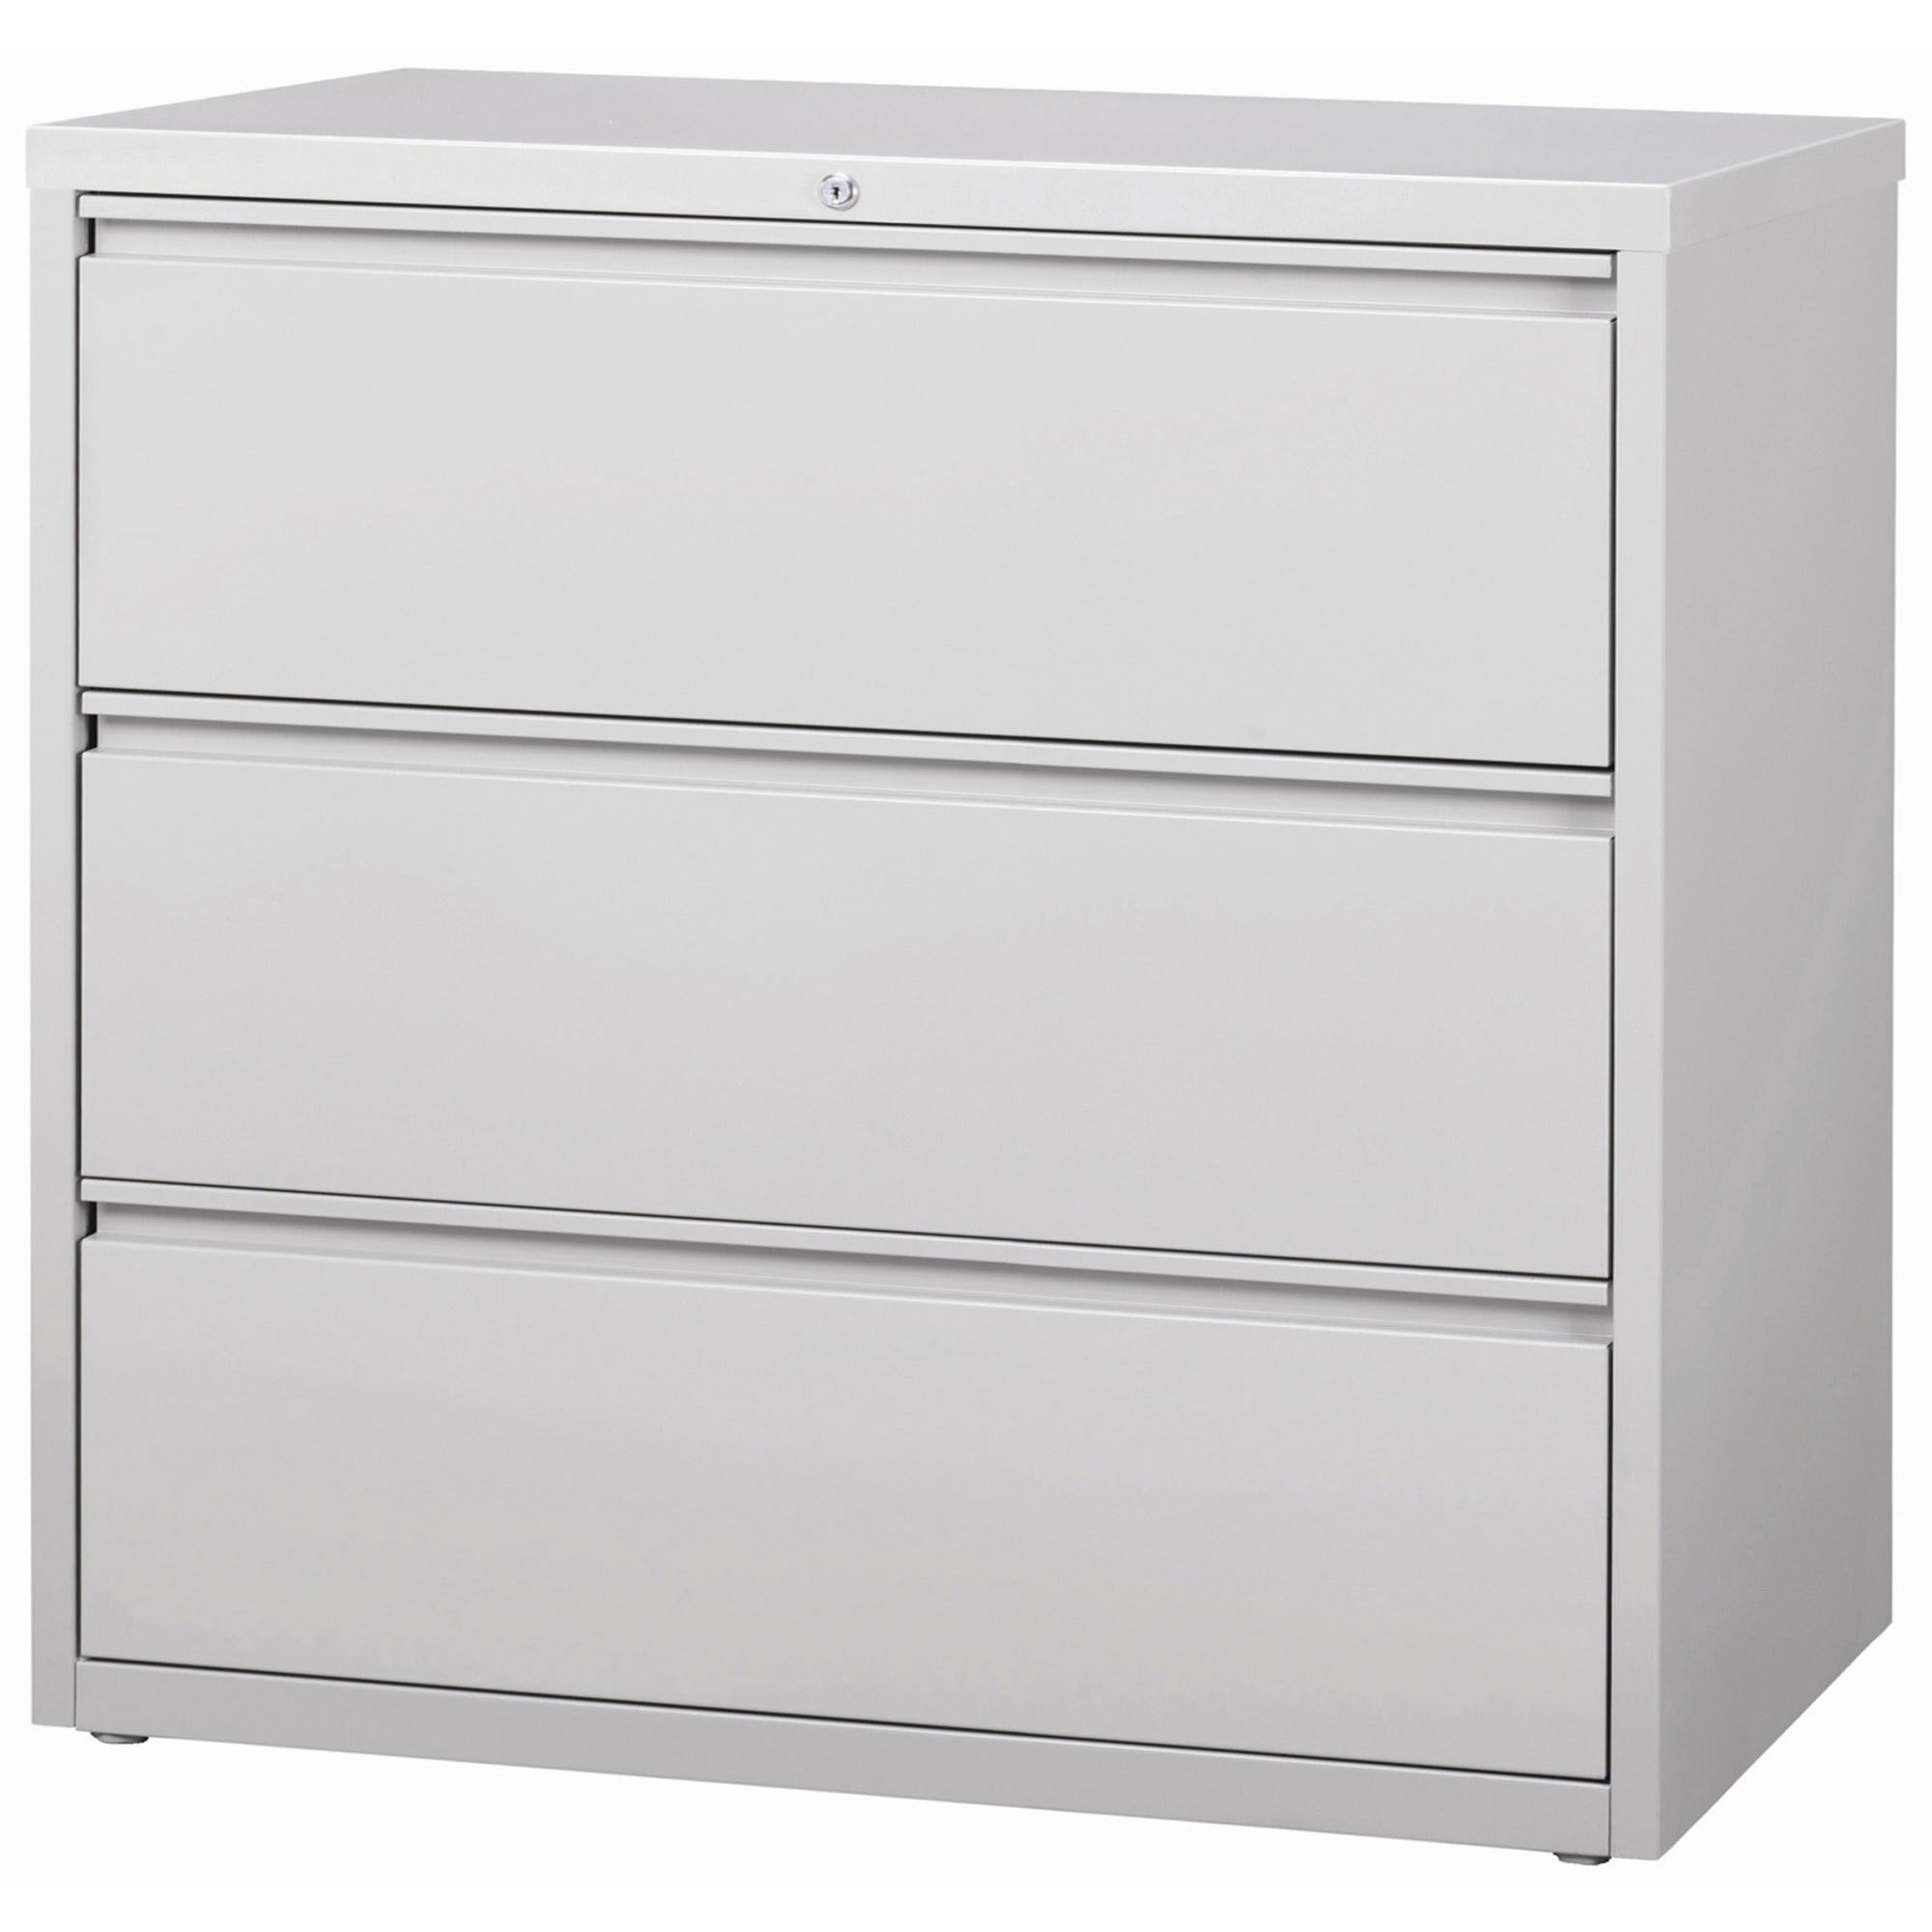 Lorell Fortress Series Lateral File - 42" x 18.6" x 40.3" - 3 x Drawer(s) for File - Letter, Legal, A4 - Lateral - Locking Drawer, Magnetic Label Holder, Ball-bearing Suspension, Leveling Glide - Light Gray - Steel - Recycled - 